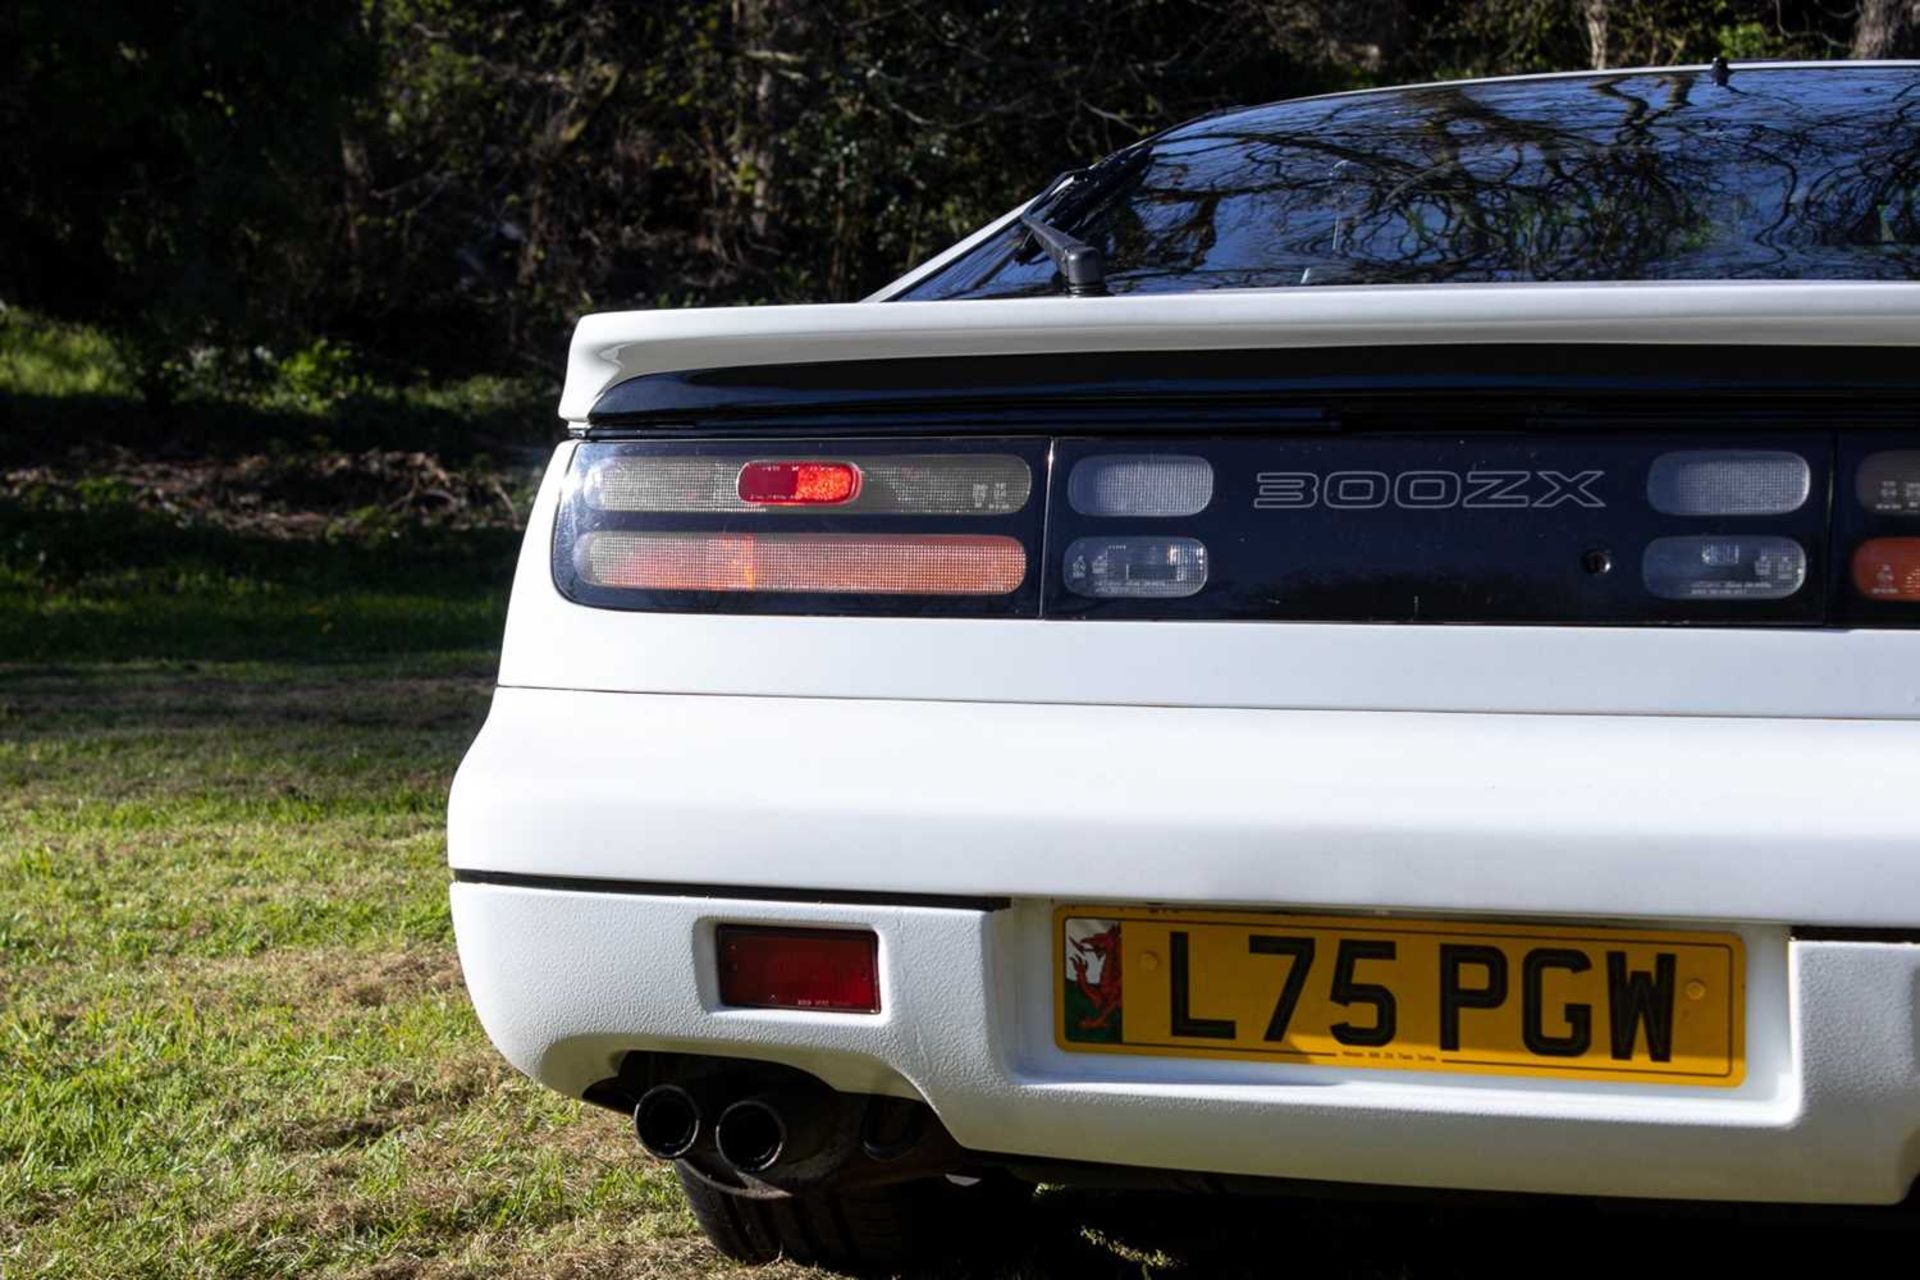 1990 Nissan 300ZX Turbo 2+2 Targa One of the last examples registered in the UK - Image 19 of 89